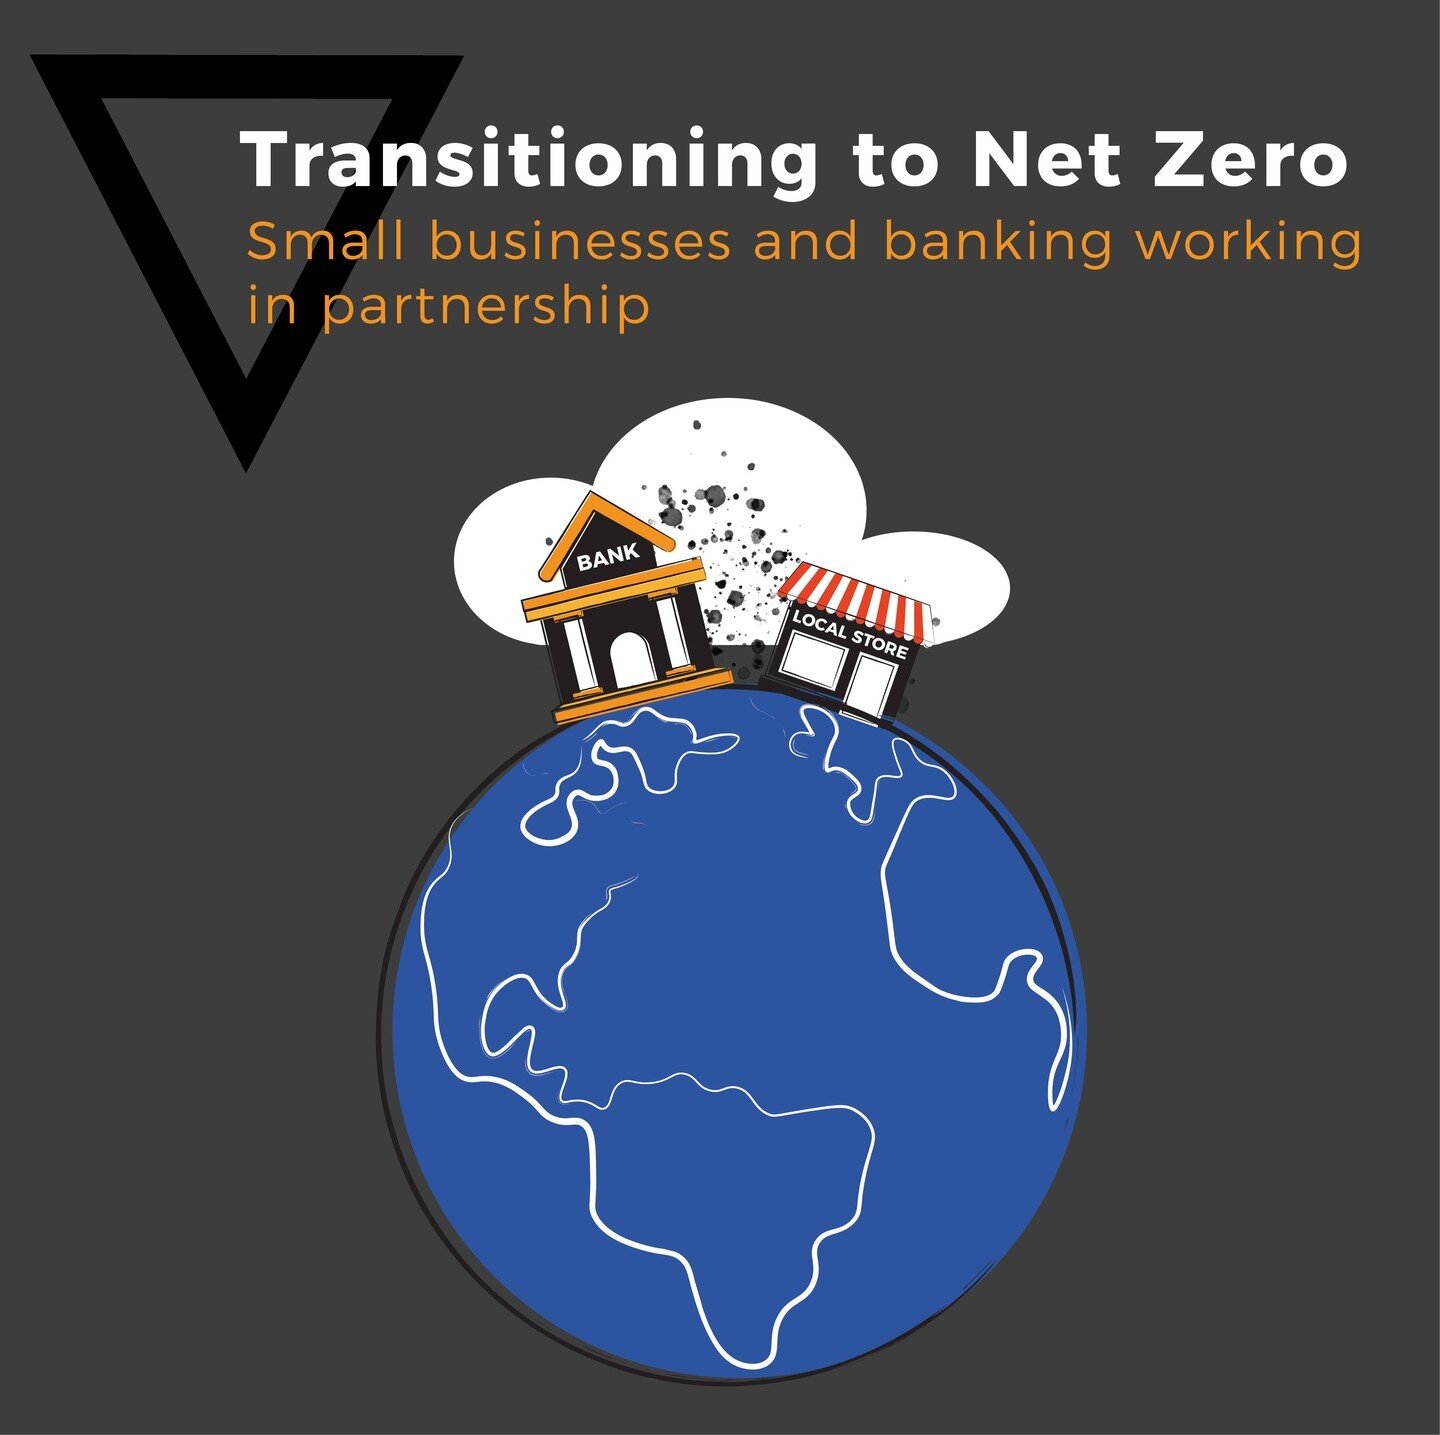 Our Head of Research is at it again! Not content with his first book being published just last week, Julian's written a white paper on how to transition to Net Zero effectively.

Head over to: https://www.thisismotif.com/our-carbon-net-zero-white-pap